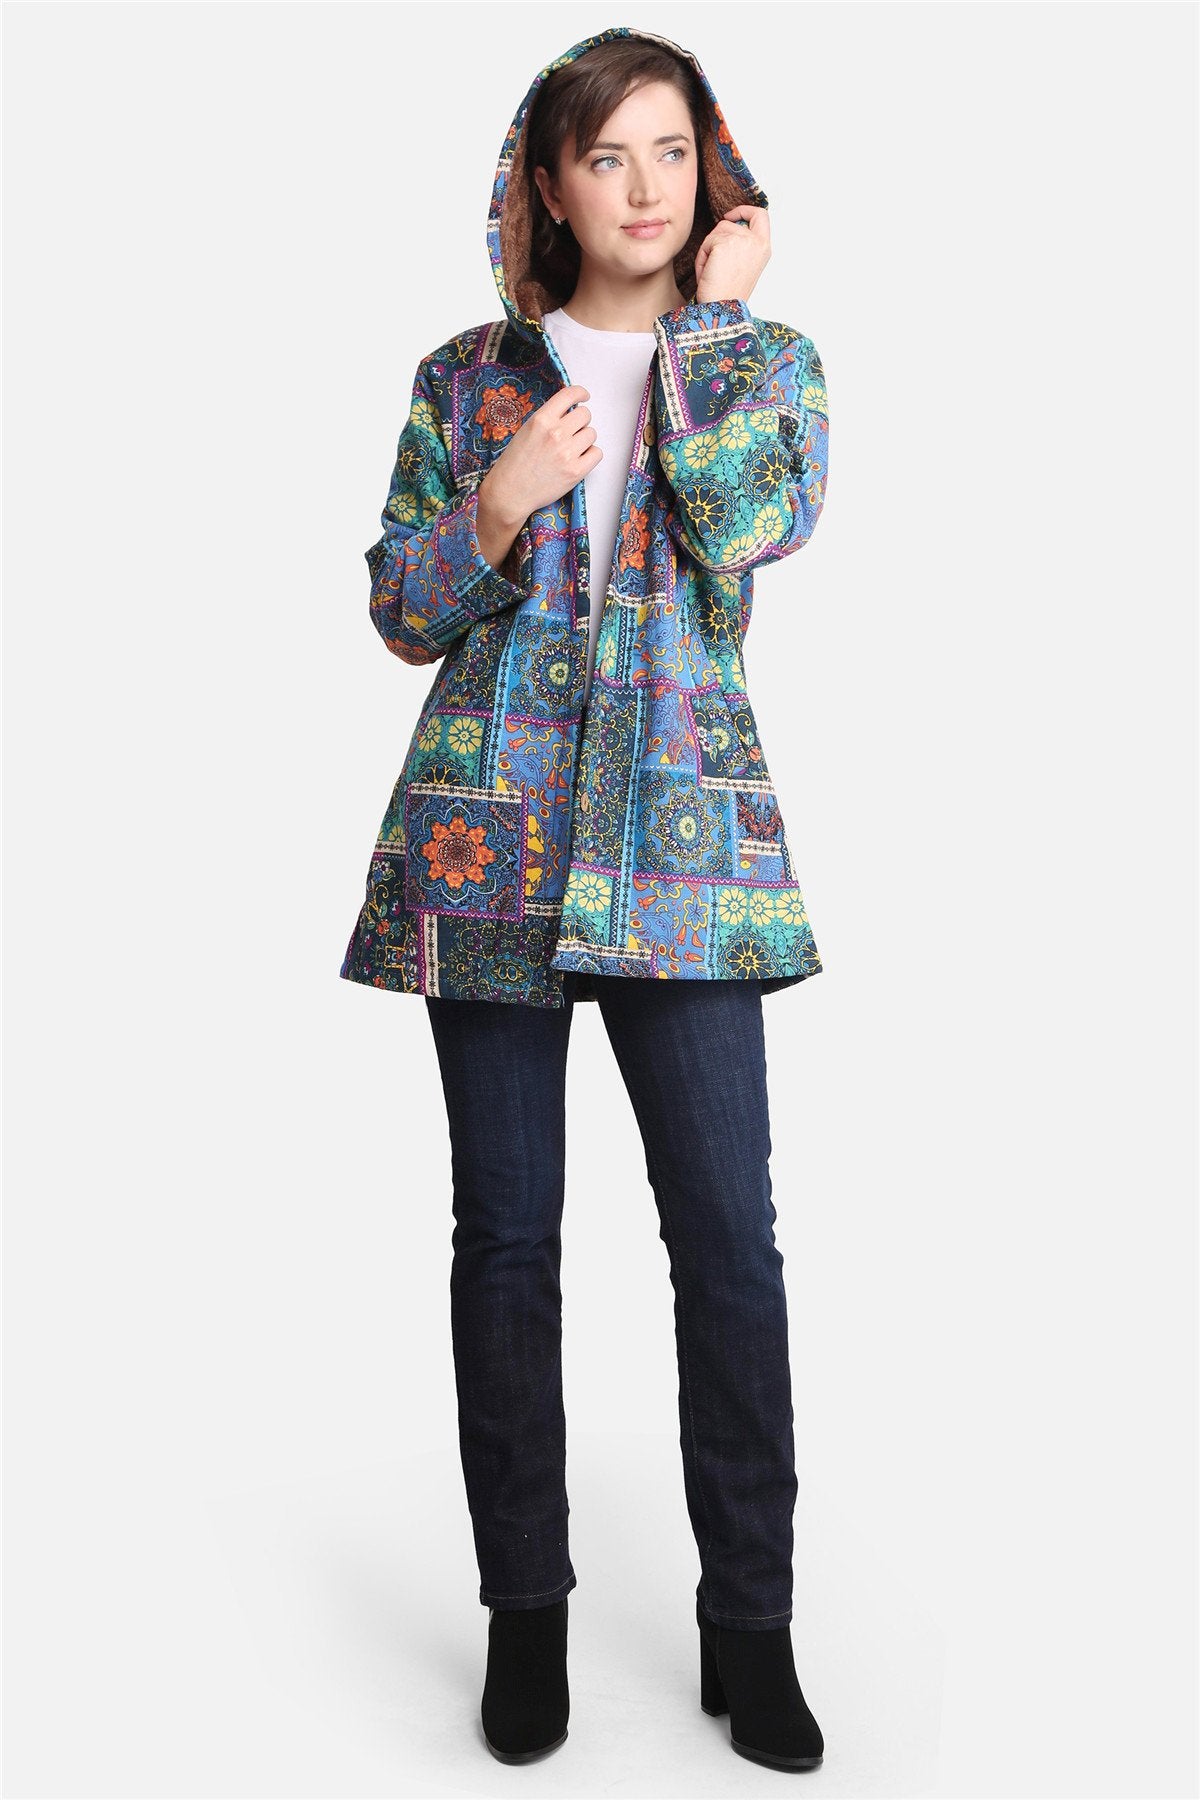 Floral & Mixed Print Jacket W/ Hood, Pockets, Button Closure, & Faux Fur Lining 